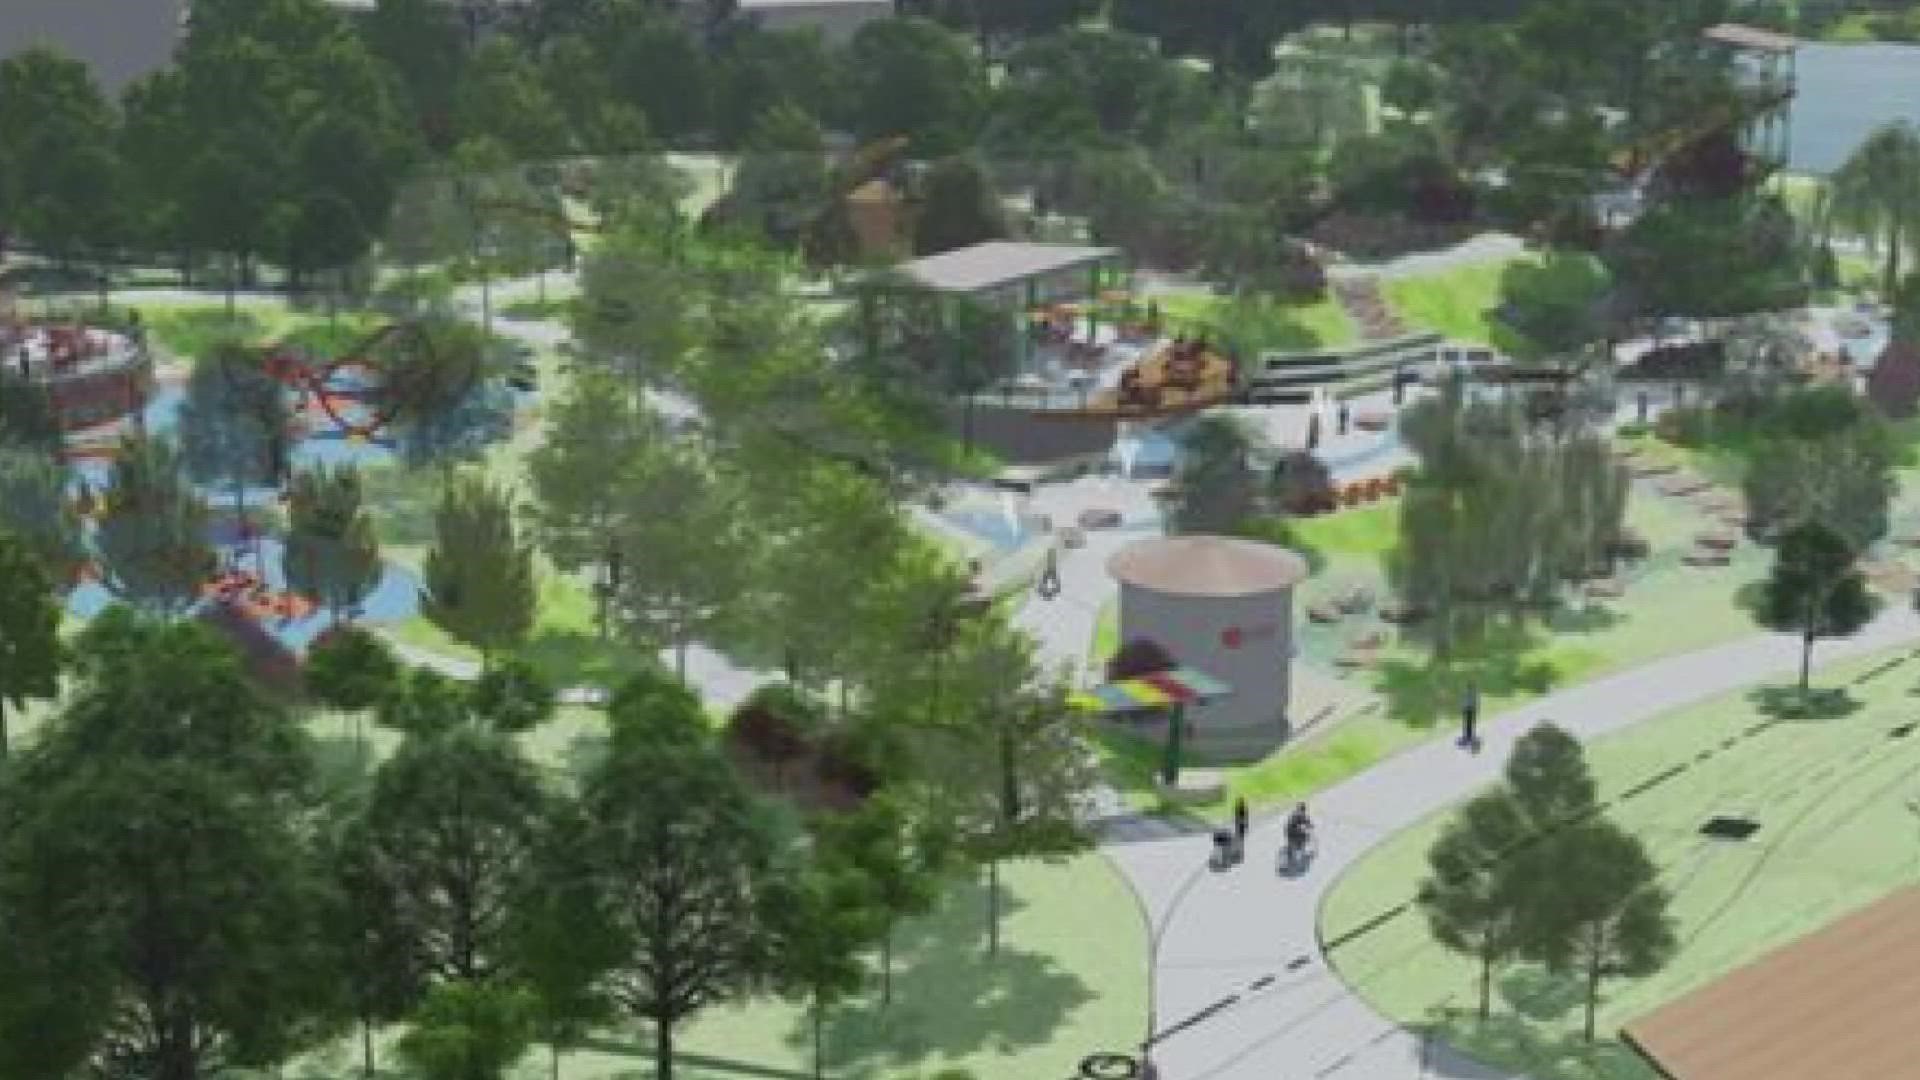 The Brentwood Board of Alderman has approved an additional $2 million for a major piece of the Brentwood Bound project. The new park should open up in 2023.